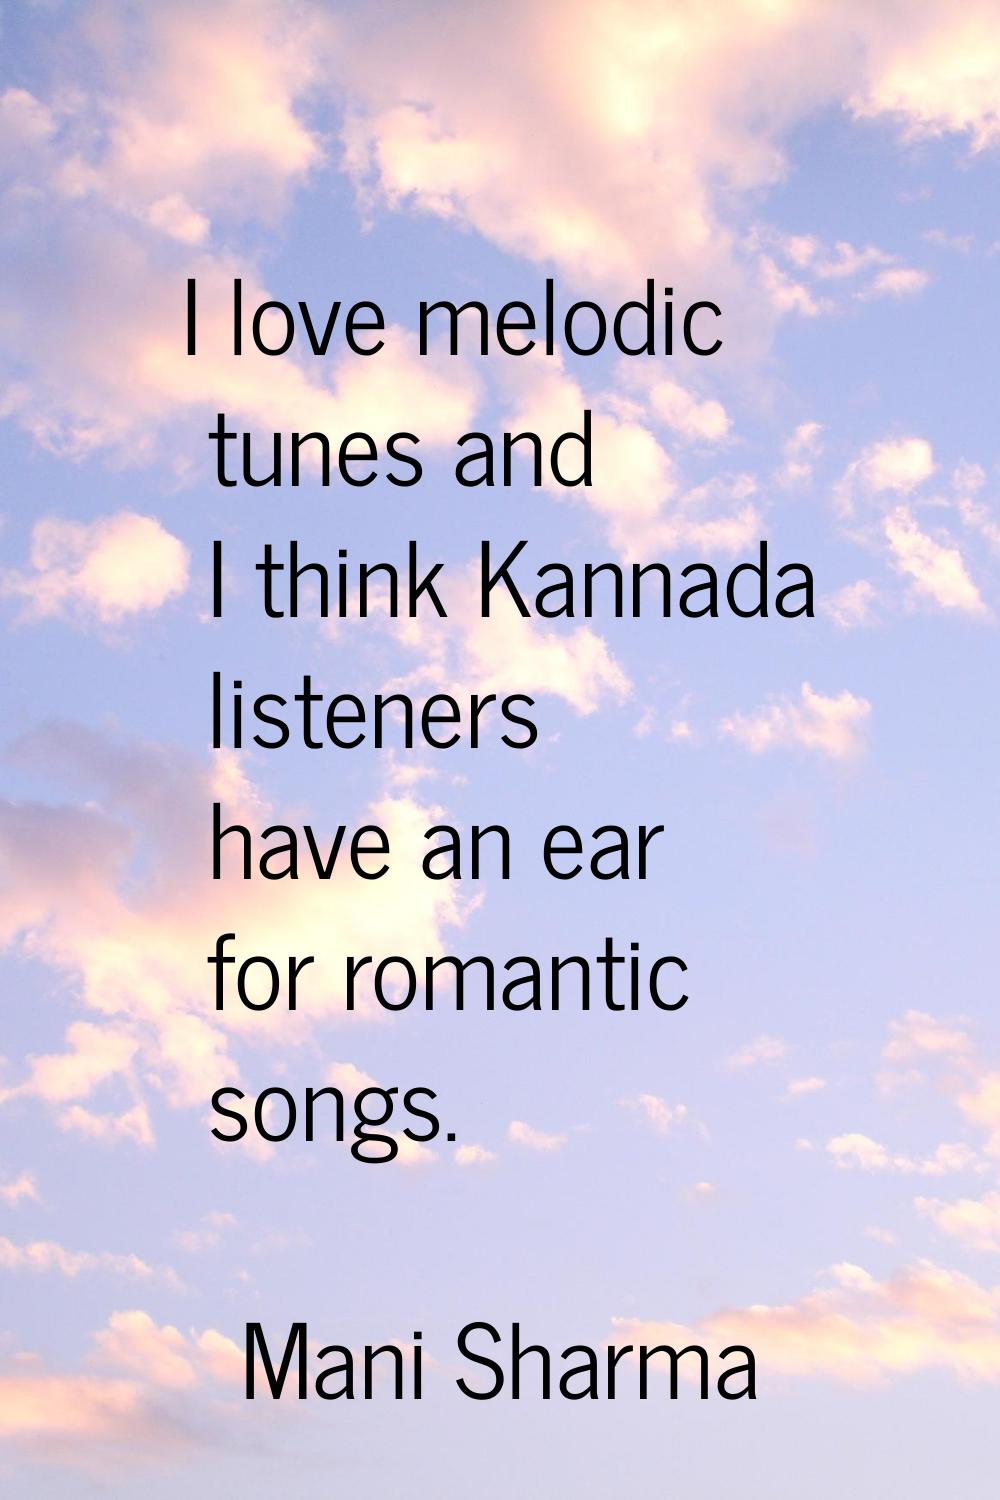 I love melodic tunes and I think Kannada listeners have an ear for romantic songs.